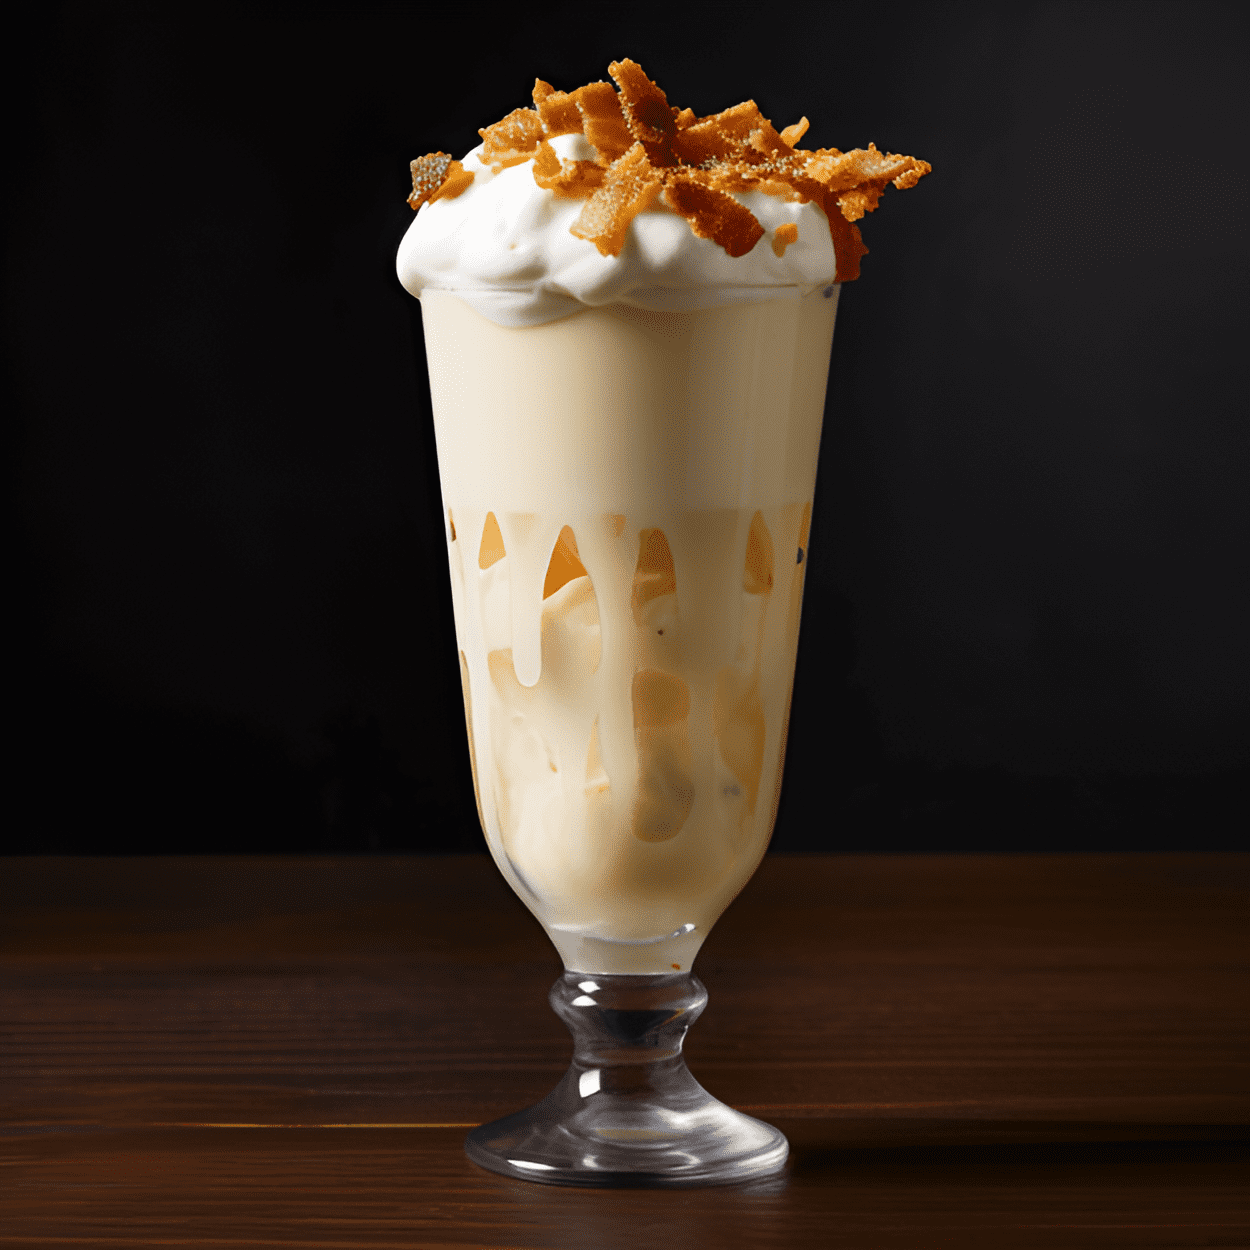 The Elvis cocktail is a sweet, creamy, and rich drink. The banana and peanut butter flavors are prominent, with a subtle smoky hint from the bacon. It's a strong cocktail with a smooth finish.